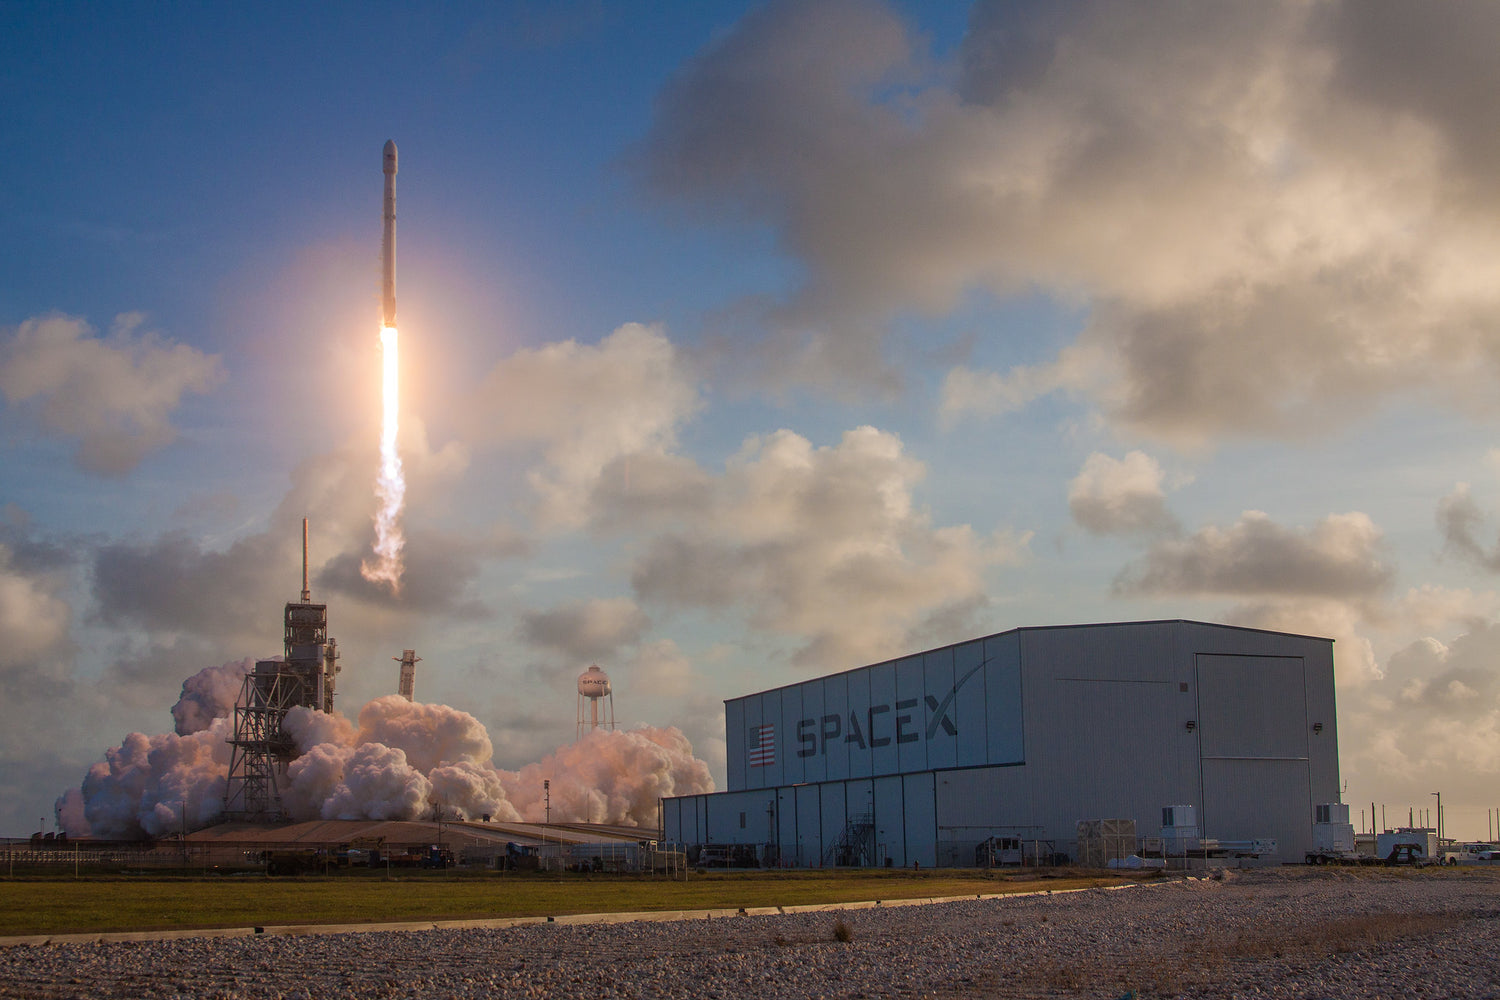 SpaceX signs deal to deploy internet-beaming SpaceBees for Swarm Technologies